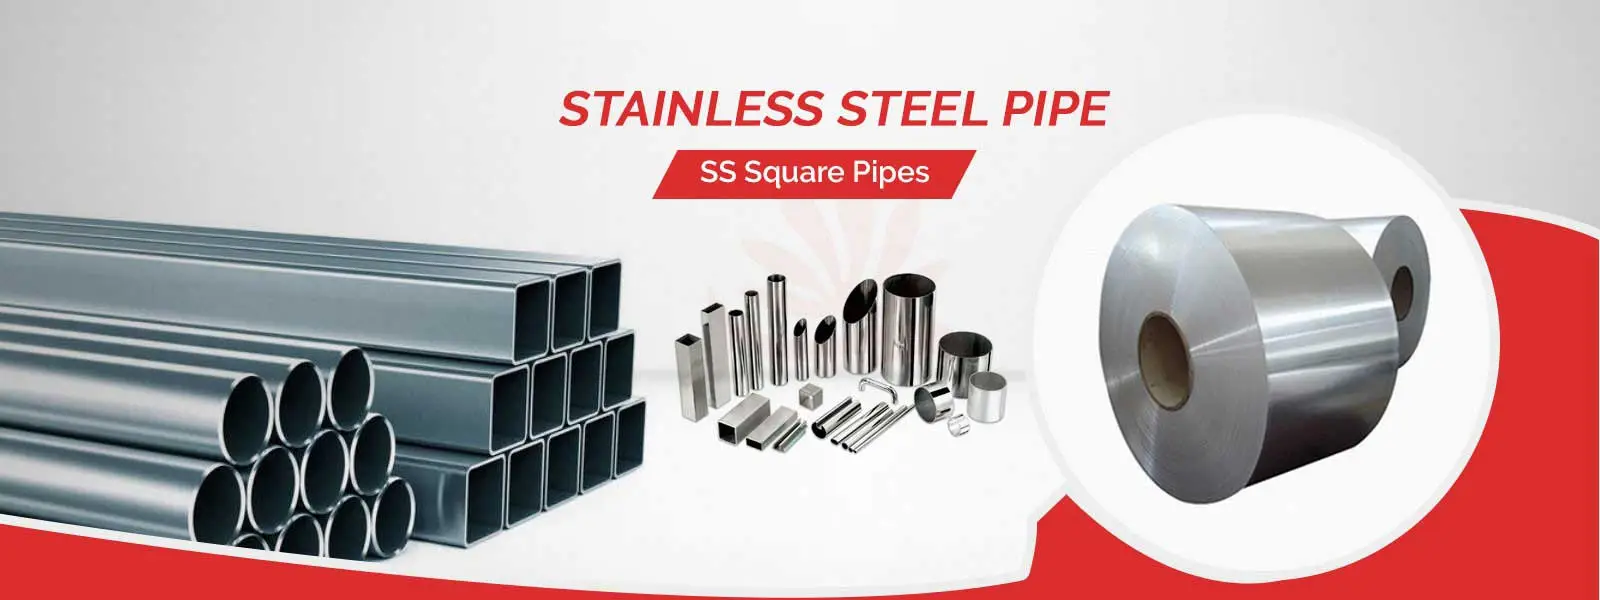 Stainless Steel Pipe Manufacturers in Gujarat